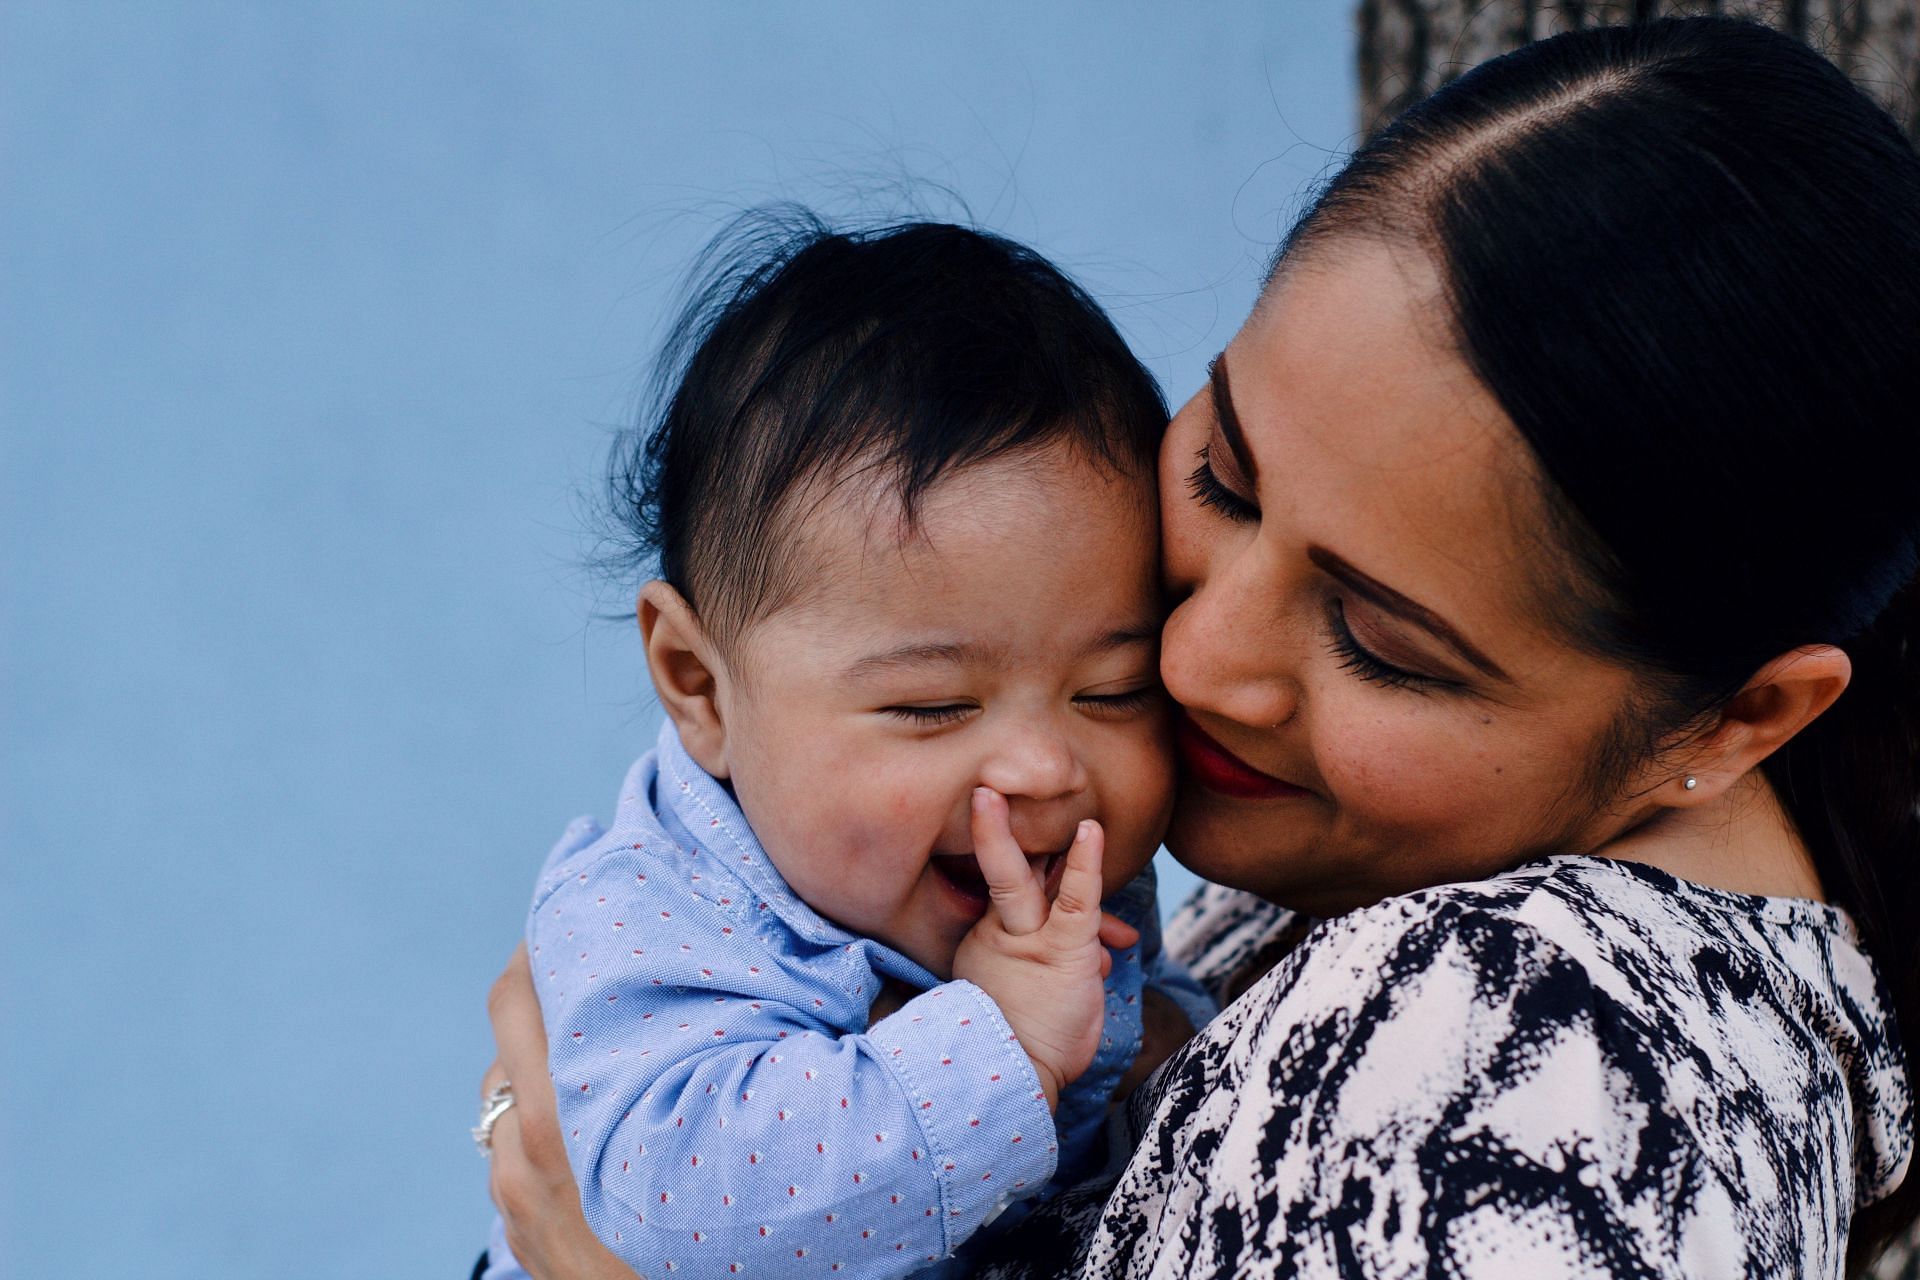 Happiness is spending time with loved ones. ( Photo by laura garcia via pexels )